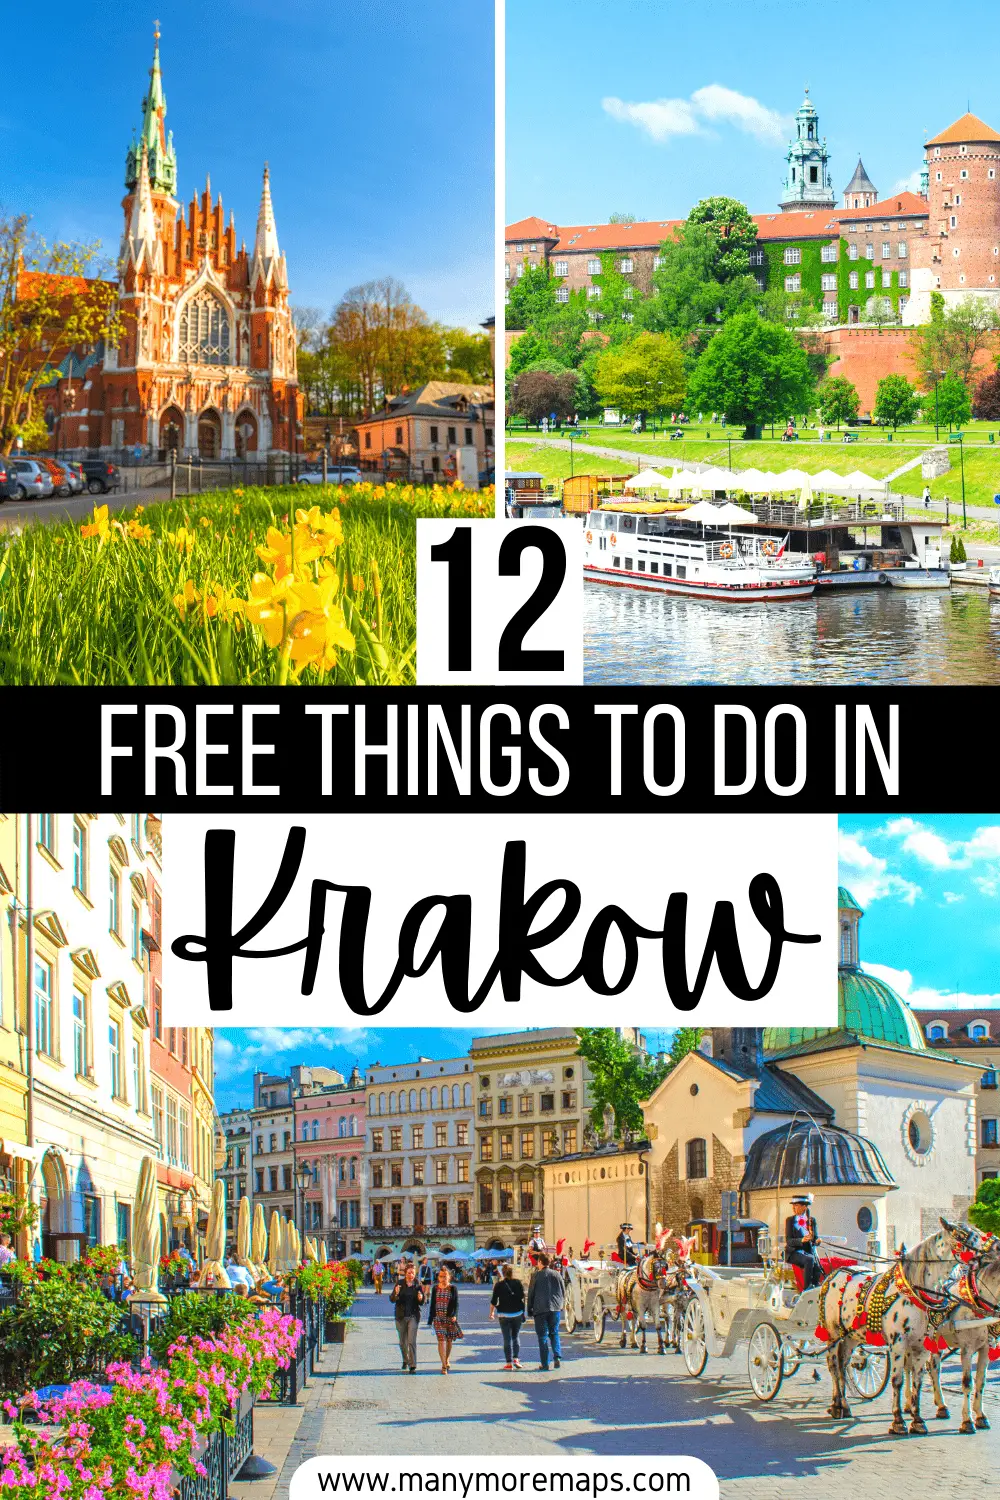 Travelling to Krakow, Poland on a tight budget? No worries! Here are the very best free things to do, places to visit, and things to see in Krakow, Poland to add to your travel itinerary!